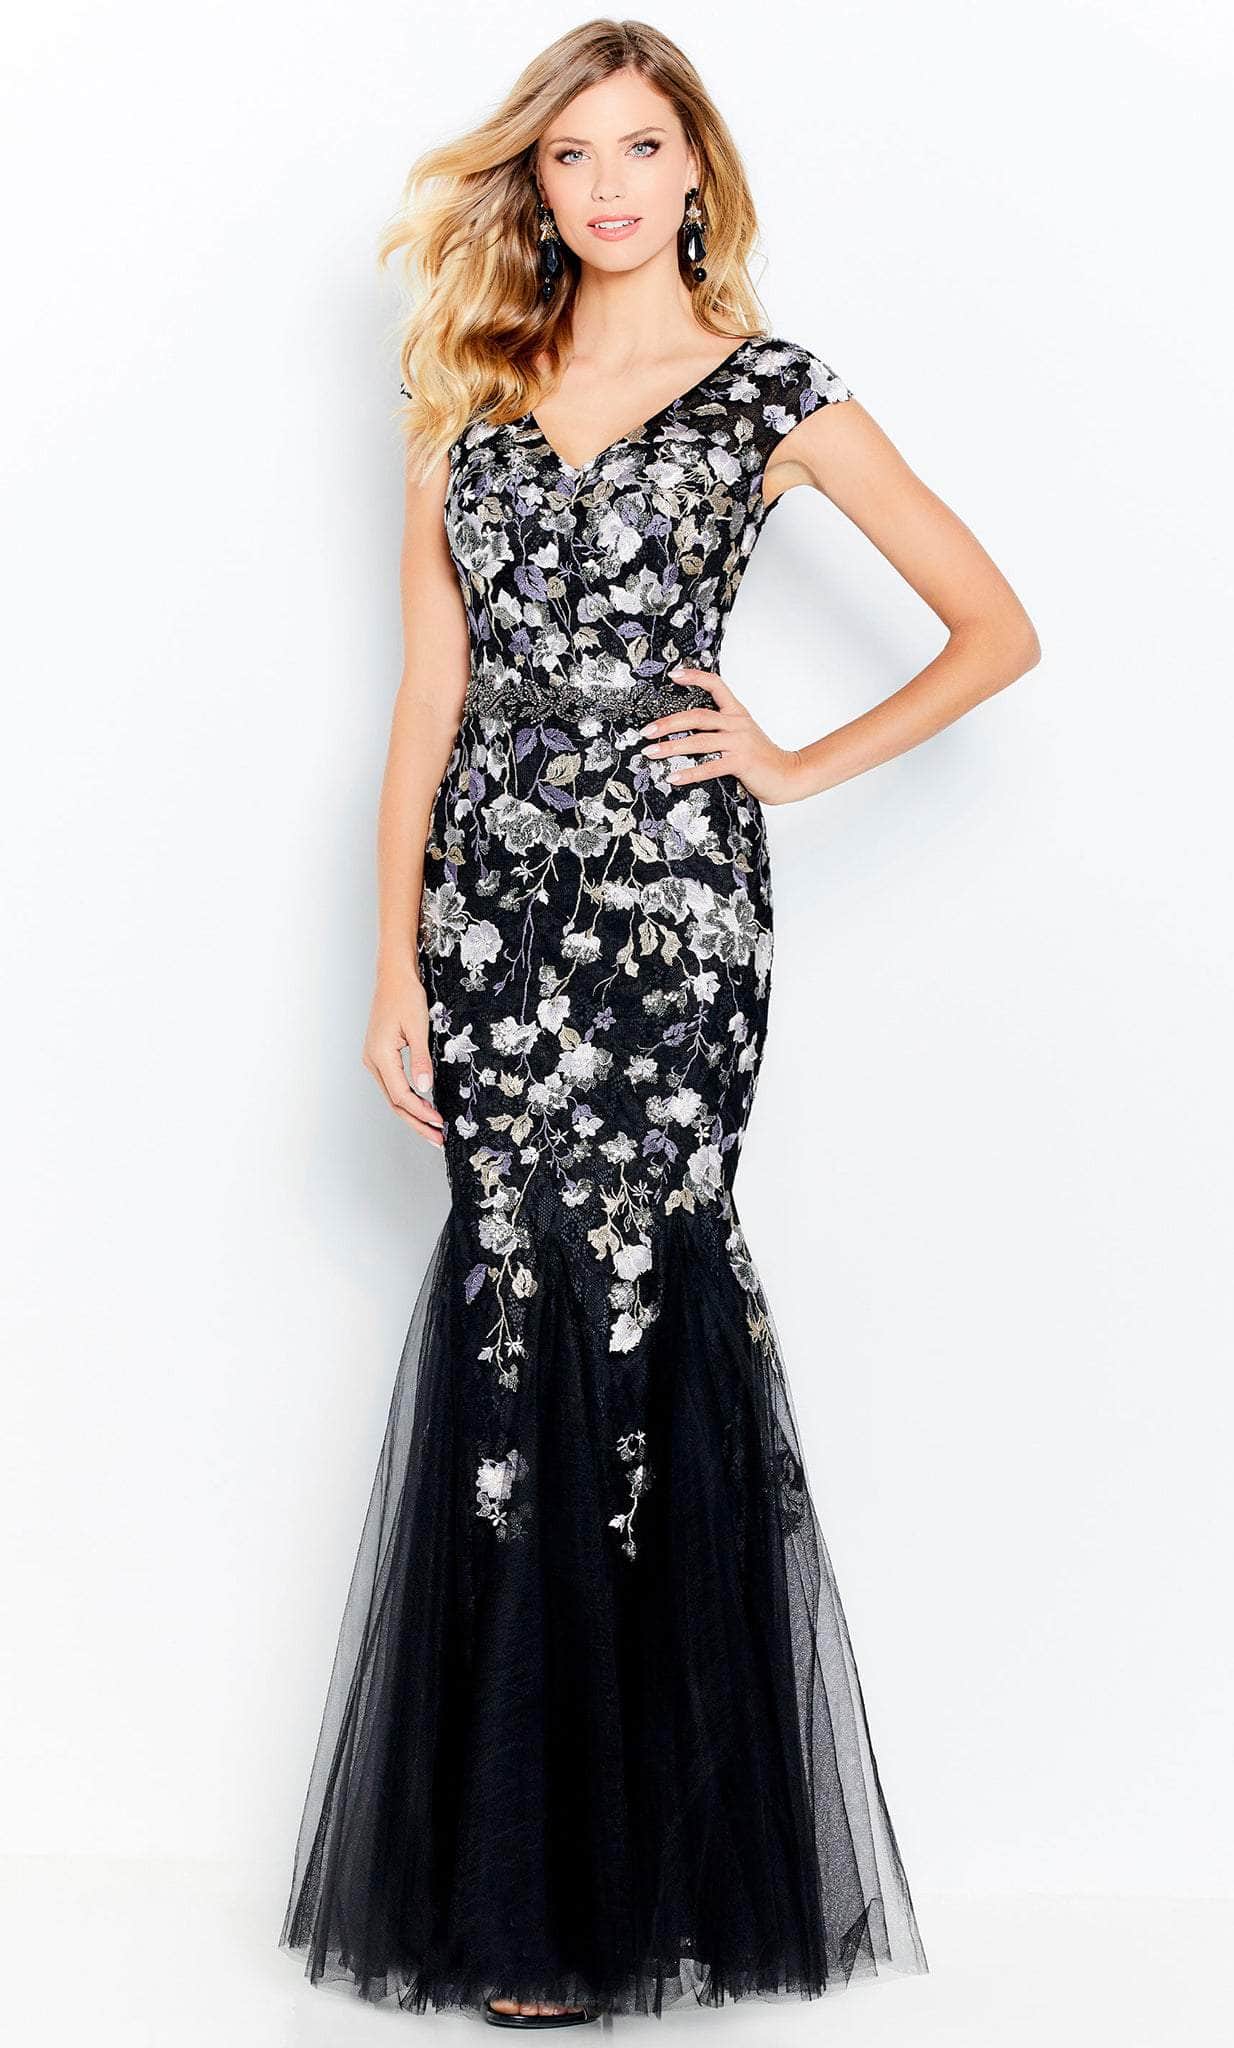 Cameron Blake 120608W - Floral Appliqued Gown